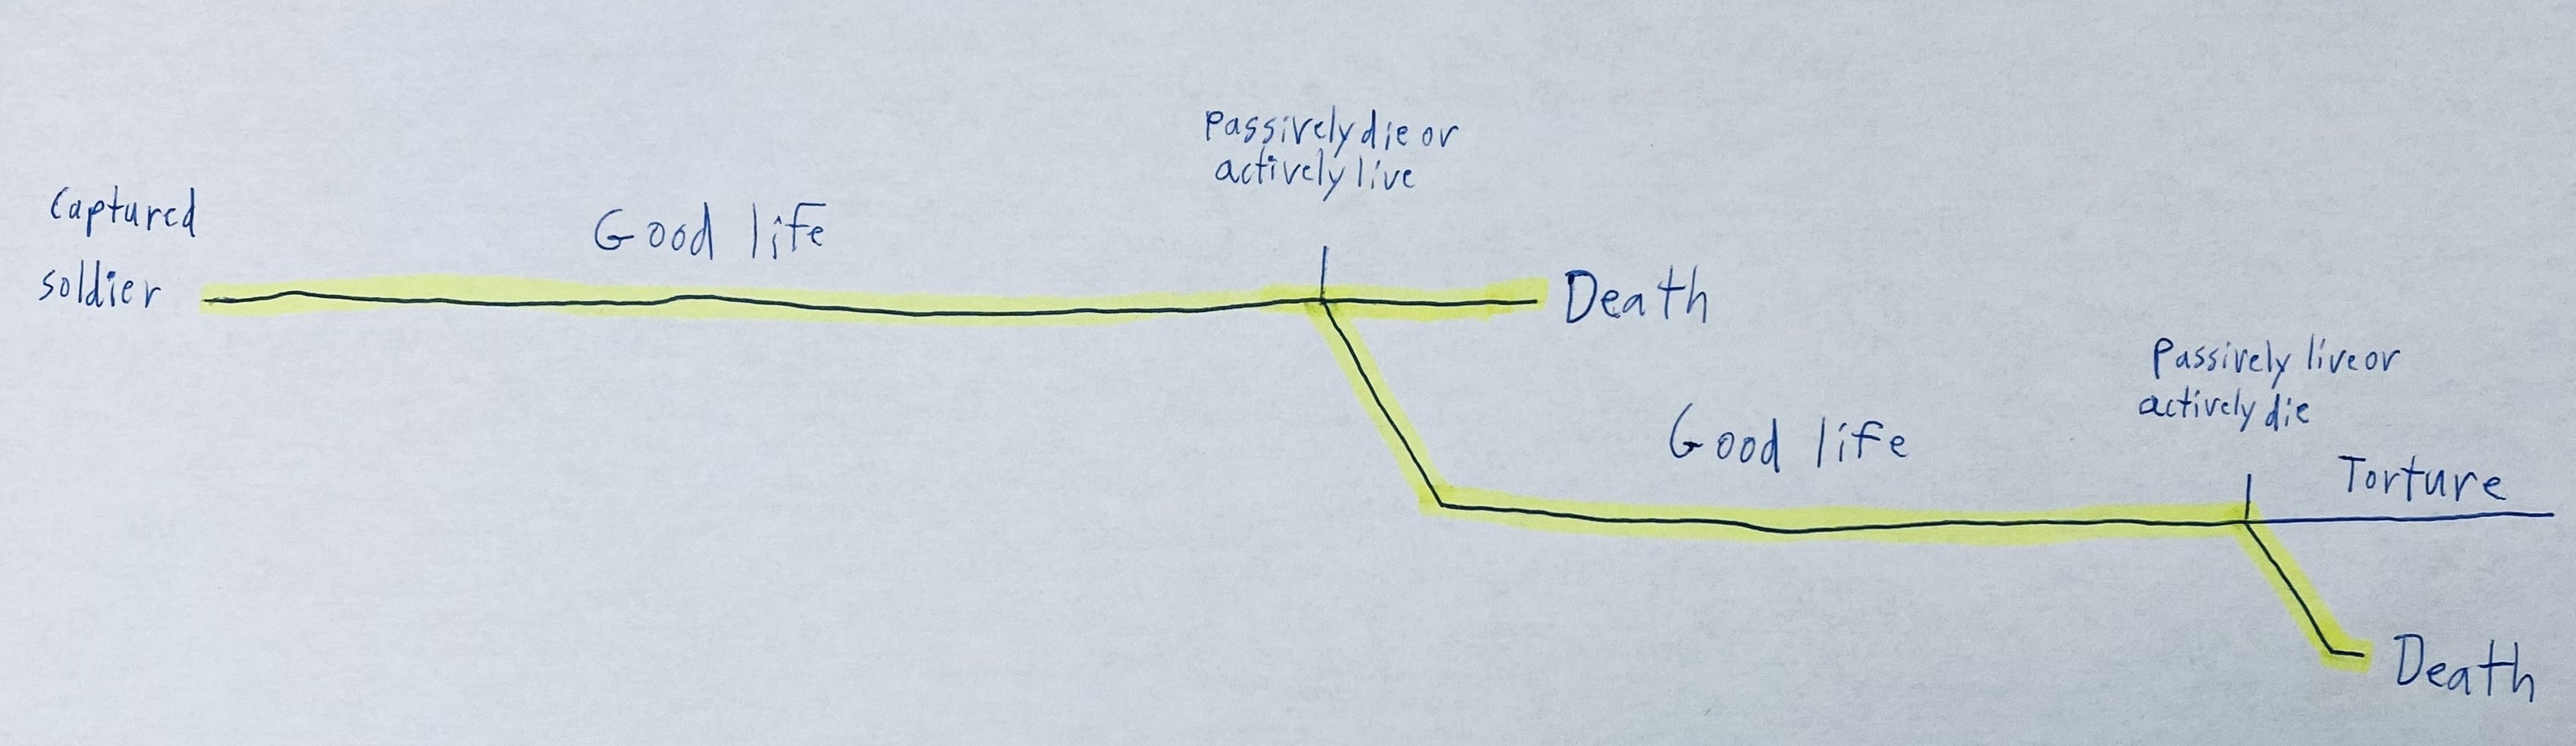 Image of a hand-drawn timeline, starting at &ldquo;captured soldier&rdquo; on the left, with a long line labeled &ldquo;good life&rdquo; extending rightwards to a fork in the path, marking the decision &ldquo;passively die or actively live&rdquo;. Going right gives &ldquo;death&rdquo;, going down and right gives another &ldquo;good life&rdquo; line, before another fork &ldquo;passively live or actively die&rdquo;. That fork, in turn, goes right to &ldquo;torture&rdquo; or down-right to &ldquo;death&rdquo;. The entire timeline, except that last &ldquo;torture&rdquo; path, is also highlighted yellow.